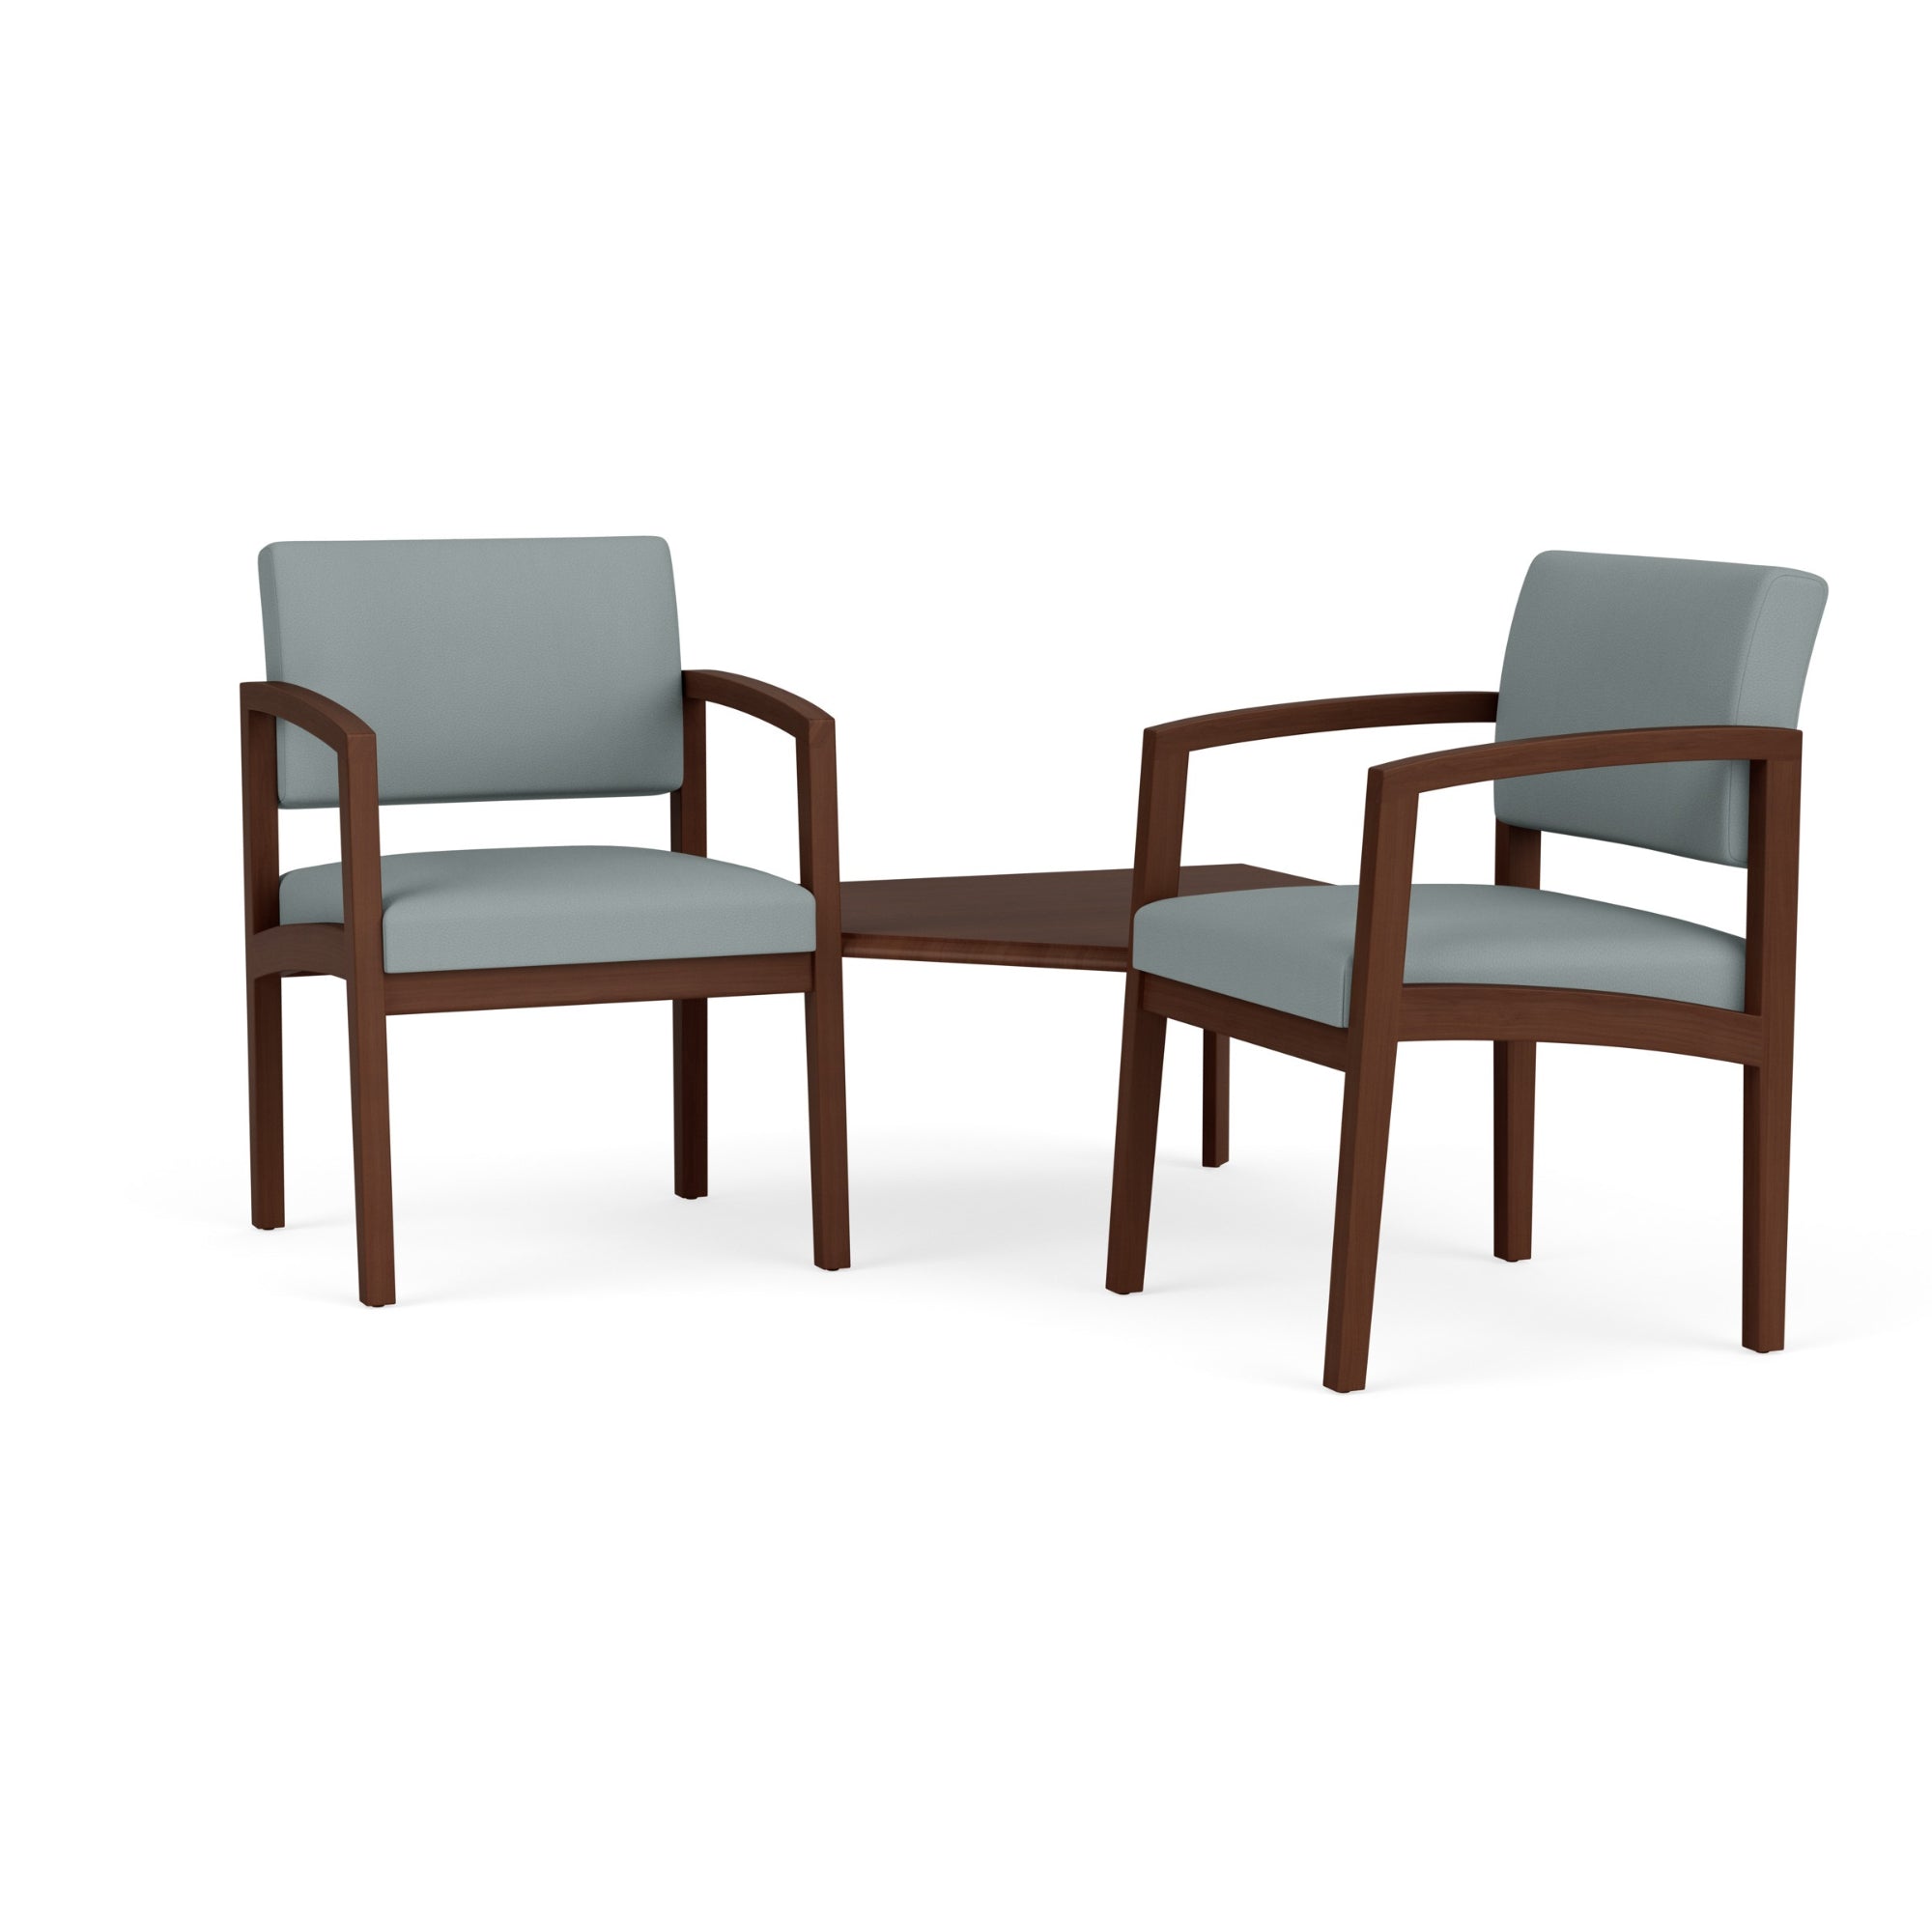 Lenox Wood Collection Reception Seating, 2 Chairs with Solid Wood Connecting Corner Table, Standard Fabric Upholstery, FREE SHIPPING